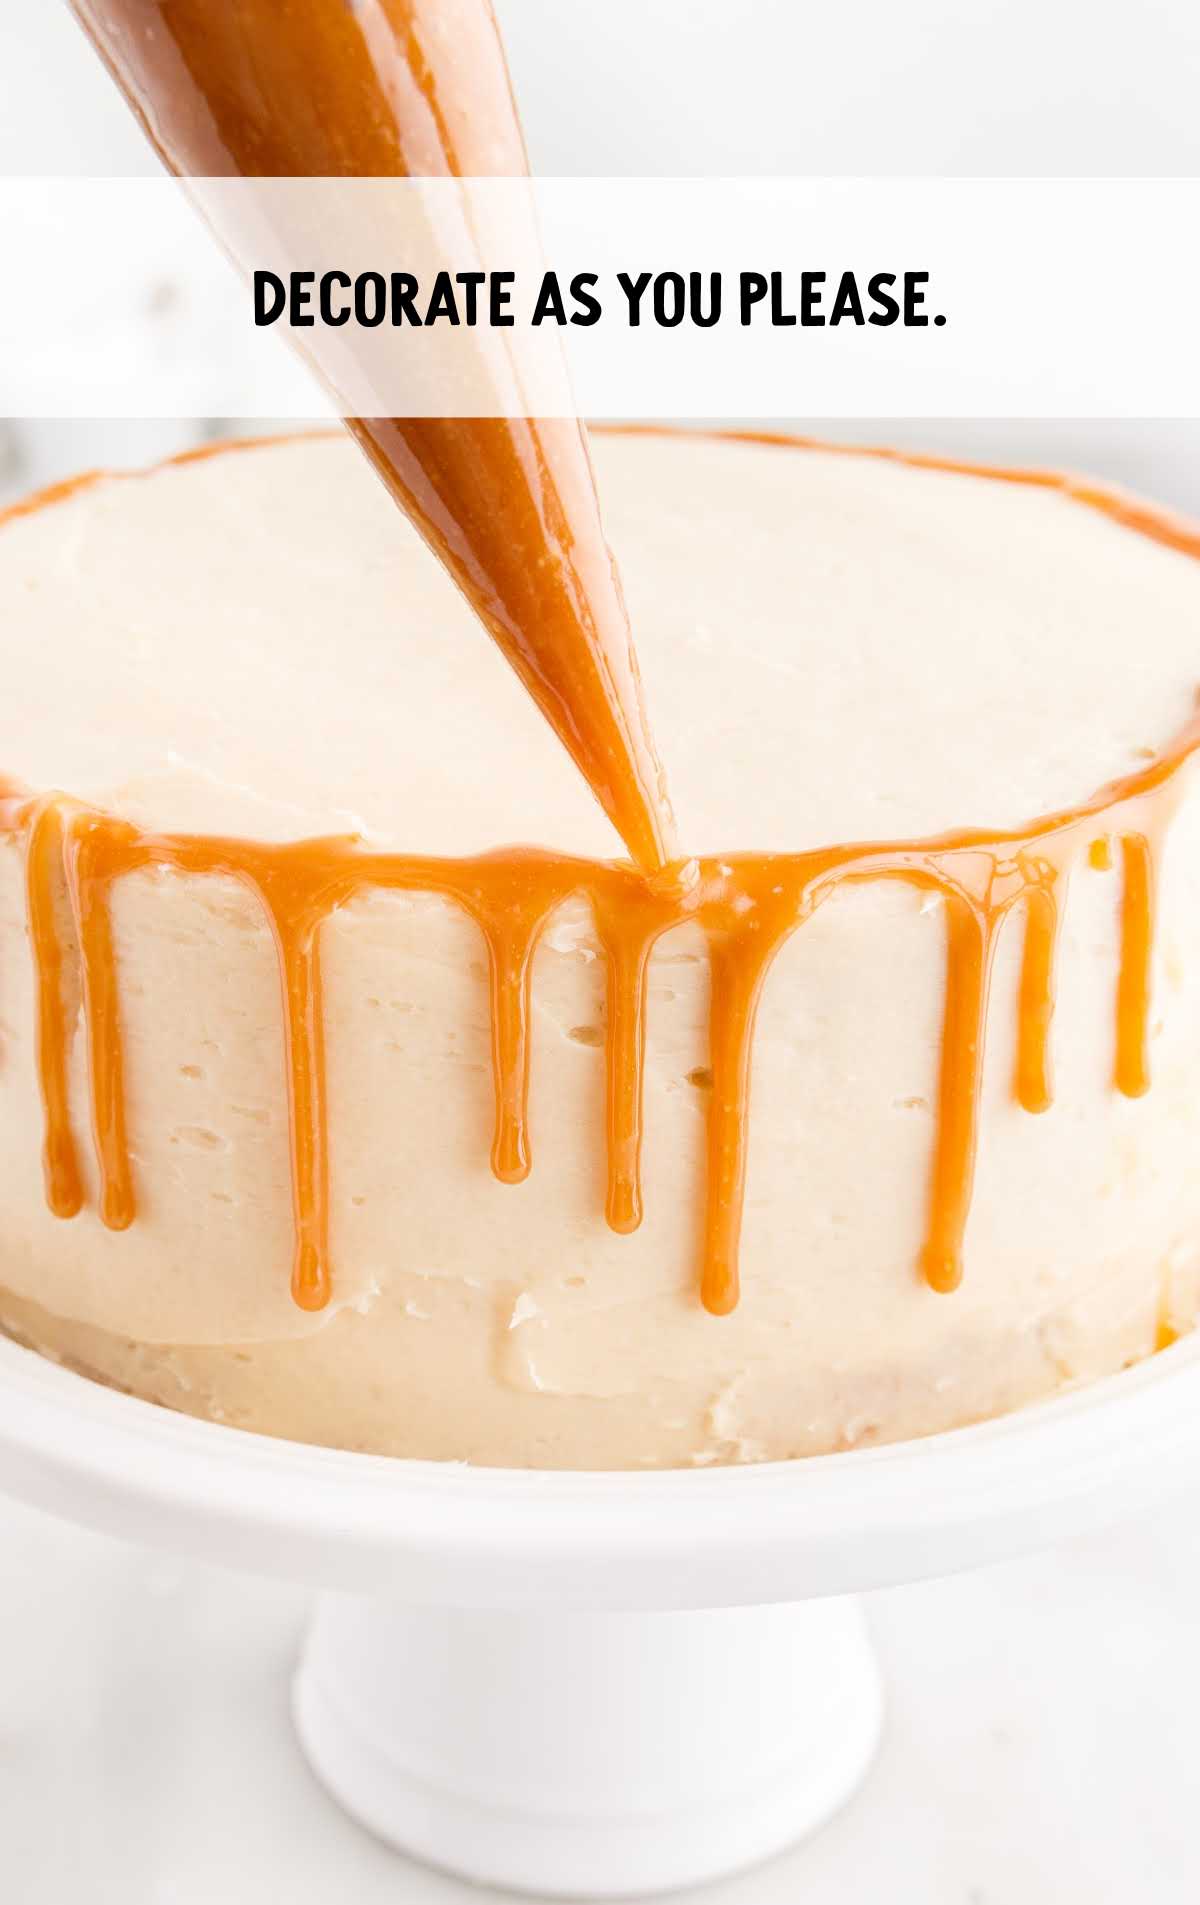 butterscotch sauce drizzled on top of the cake on a cake stand